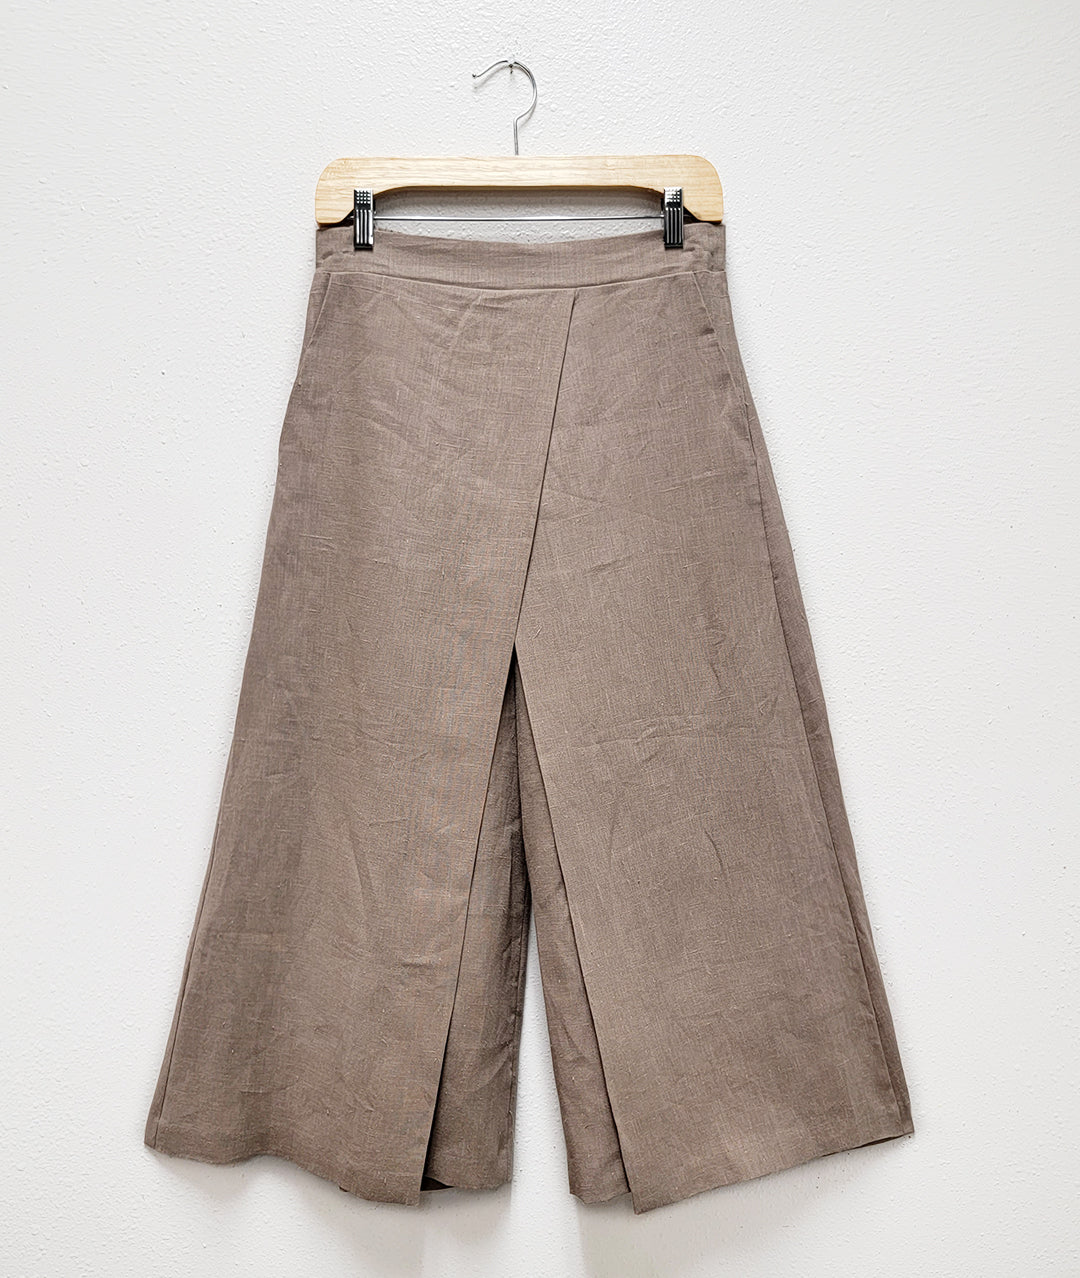 oatmeal color linen wide leg pant with an overlapping panel in the front from each leg